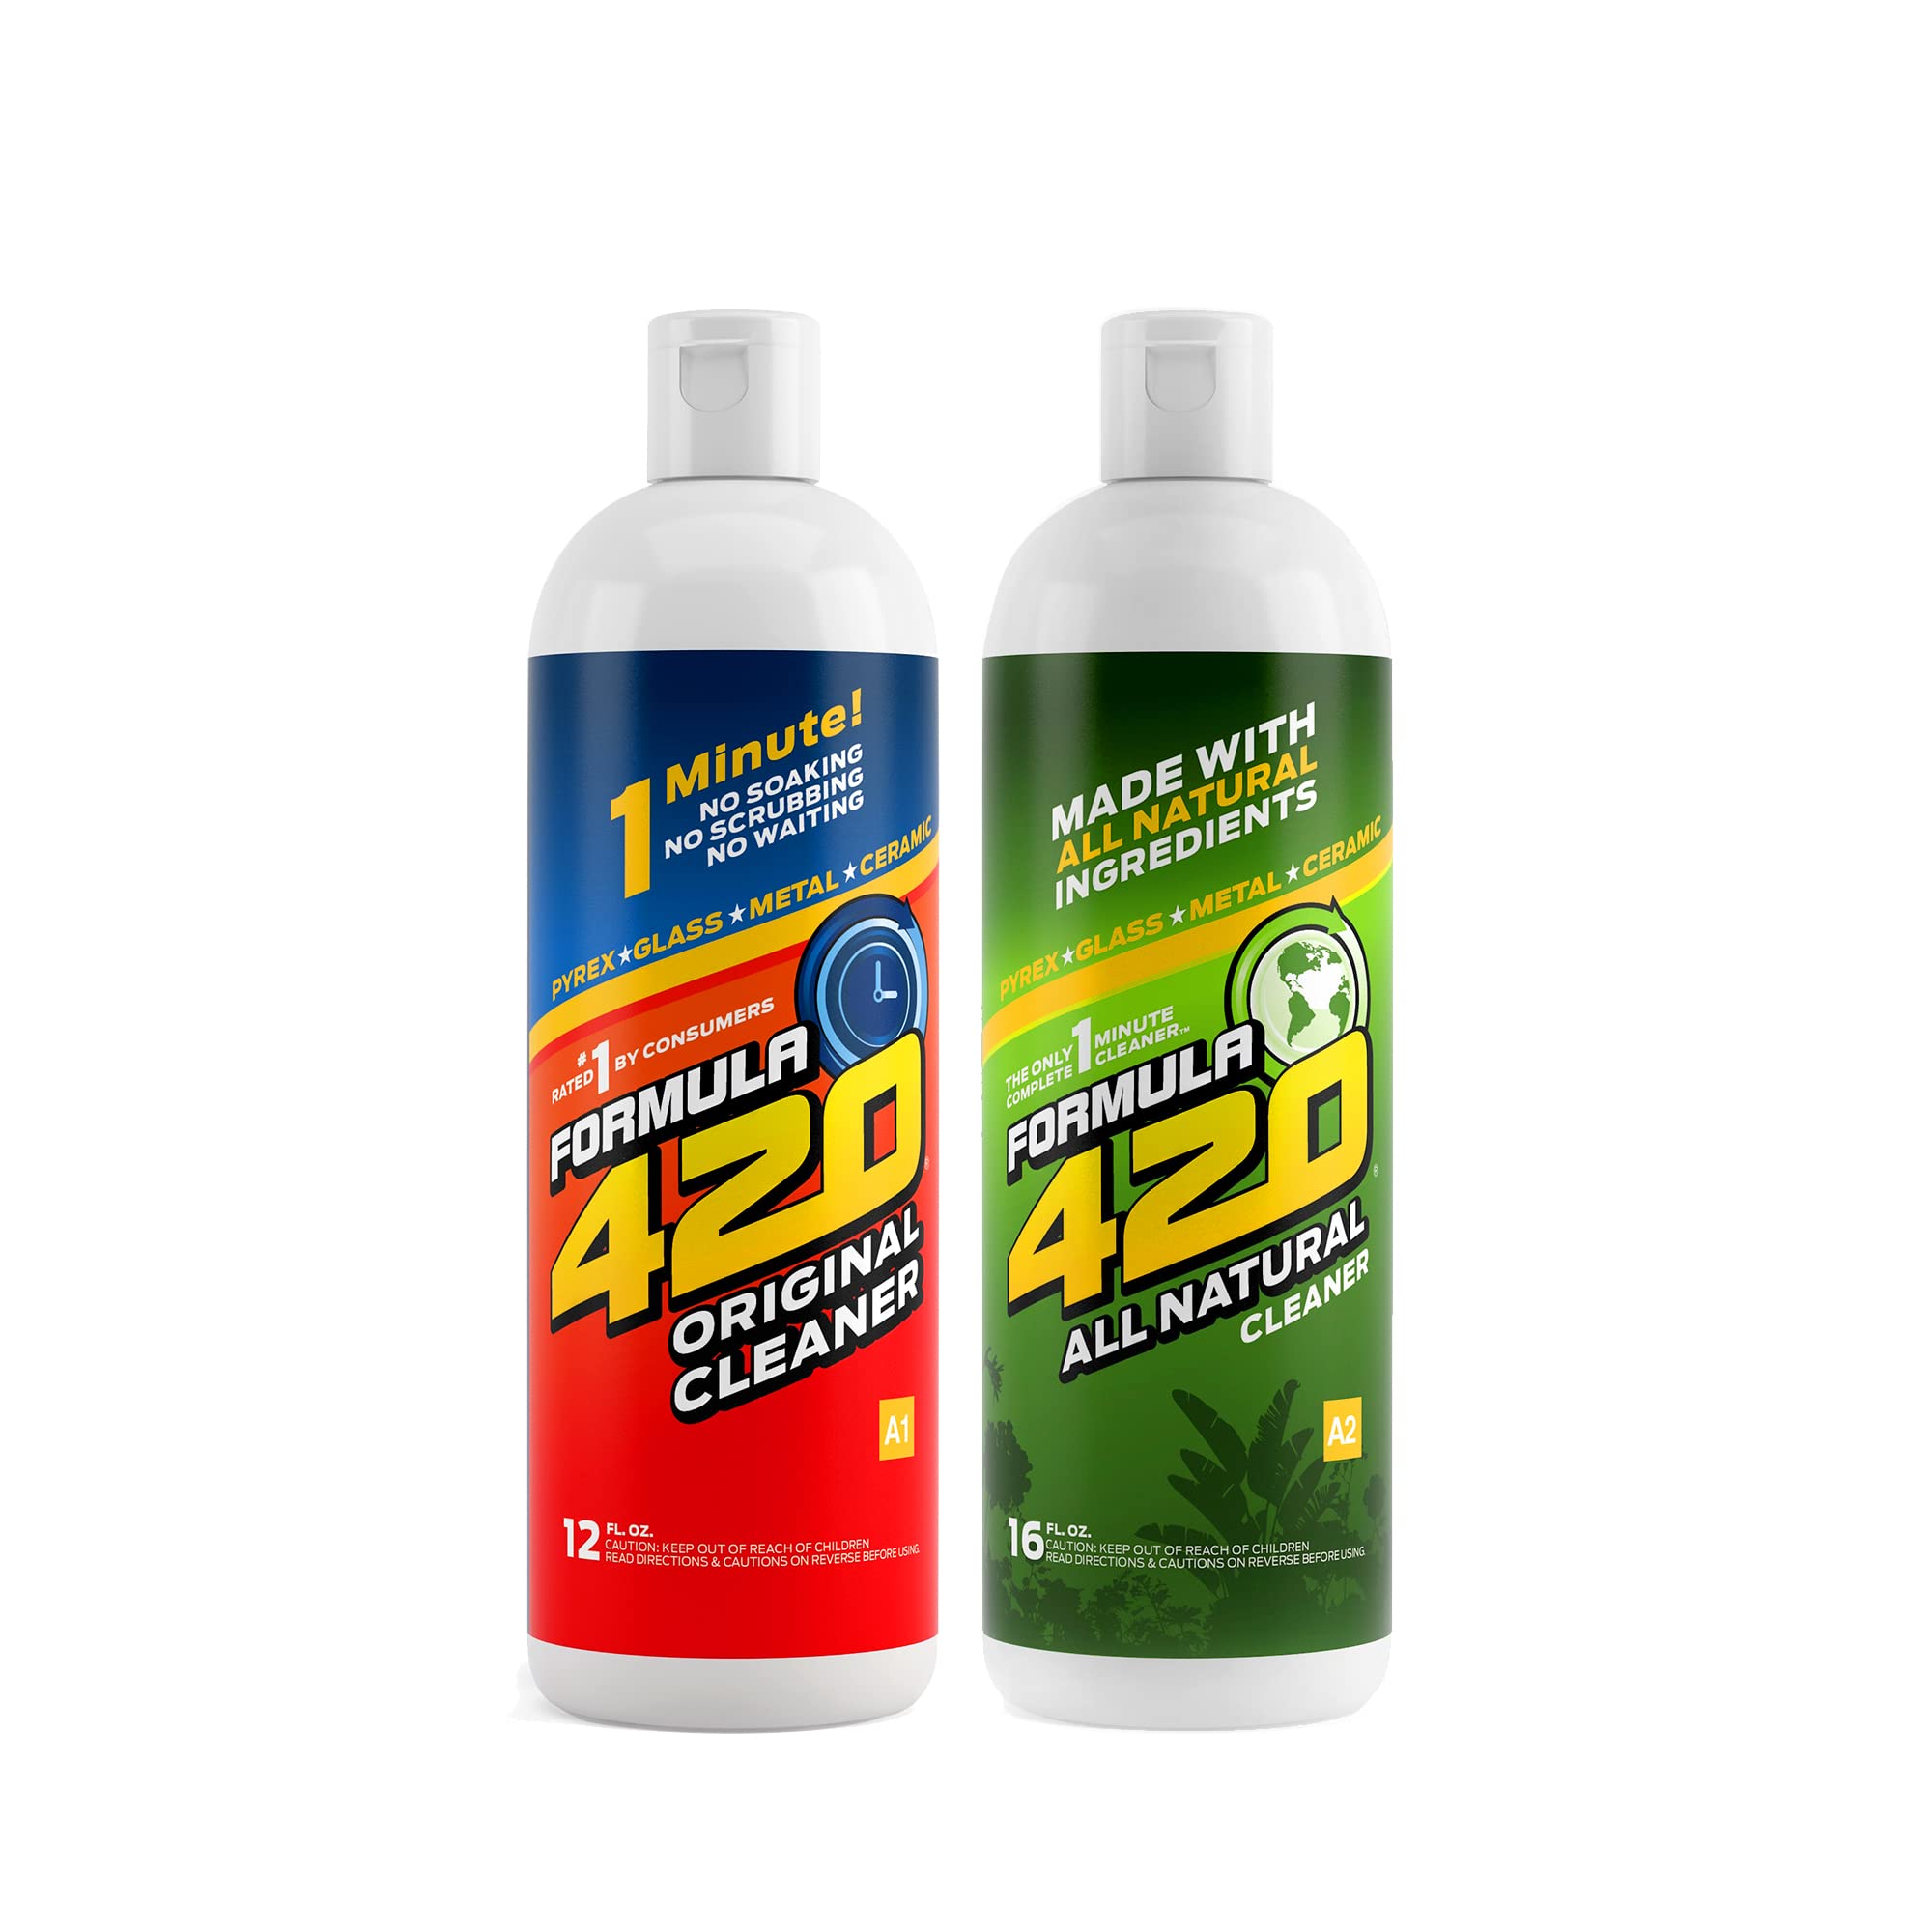  Formula420 Cleaning Kit, Glass Cleaner Value Pack